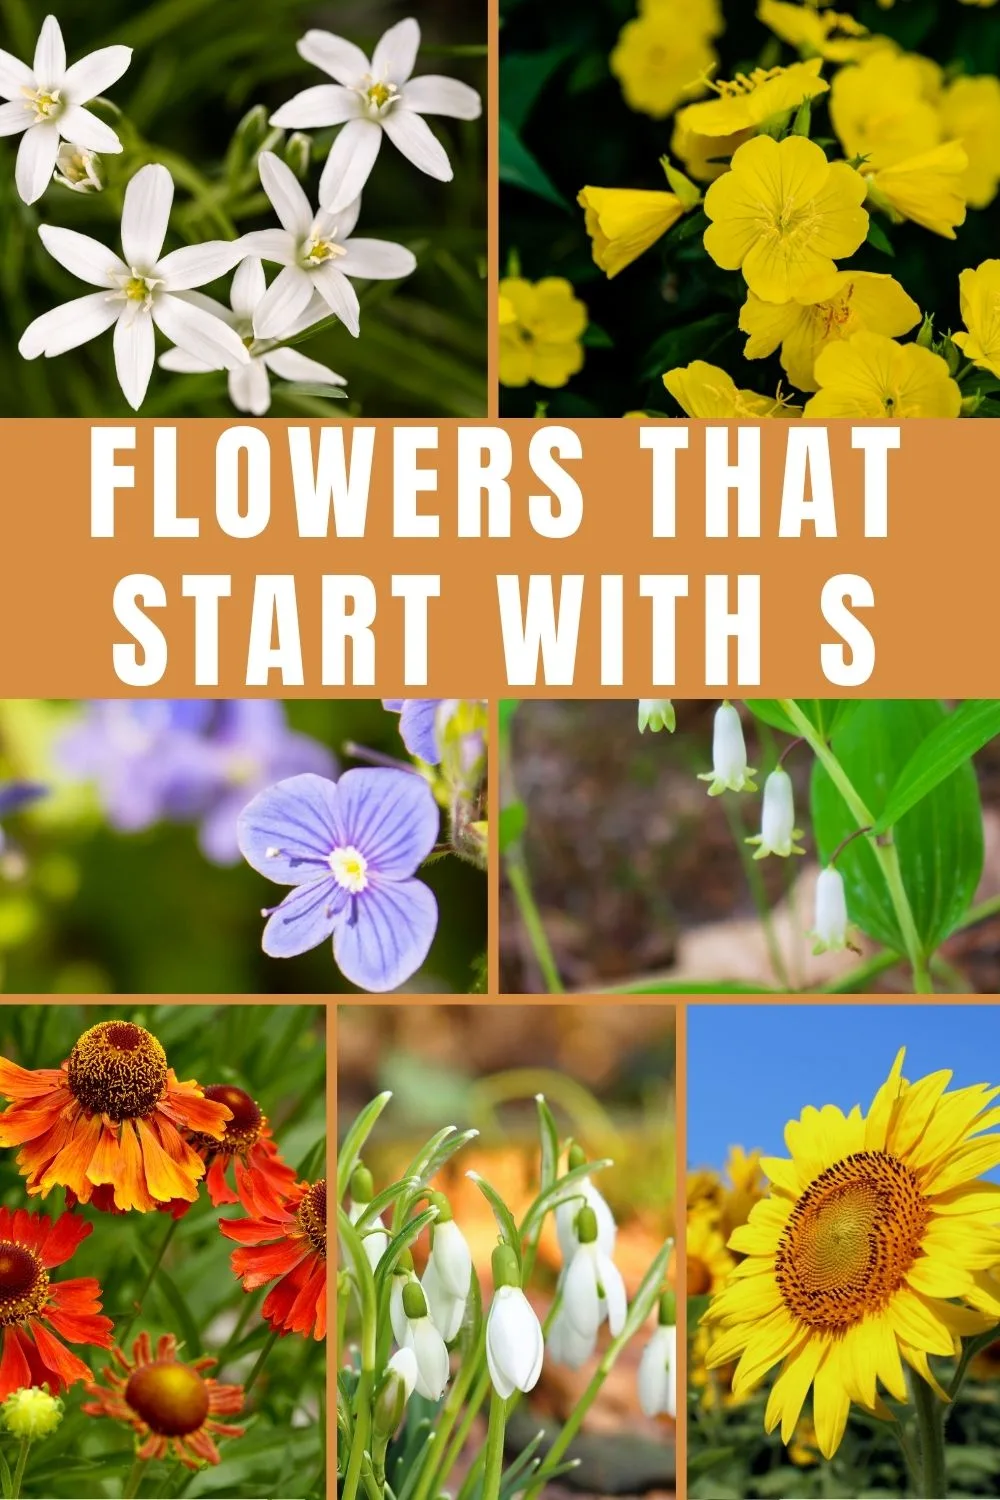 Flowers that start with S